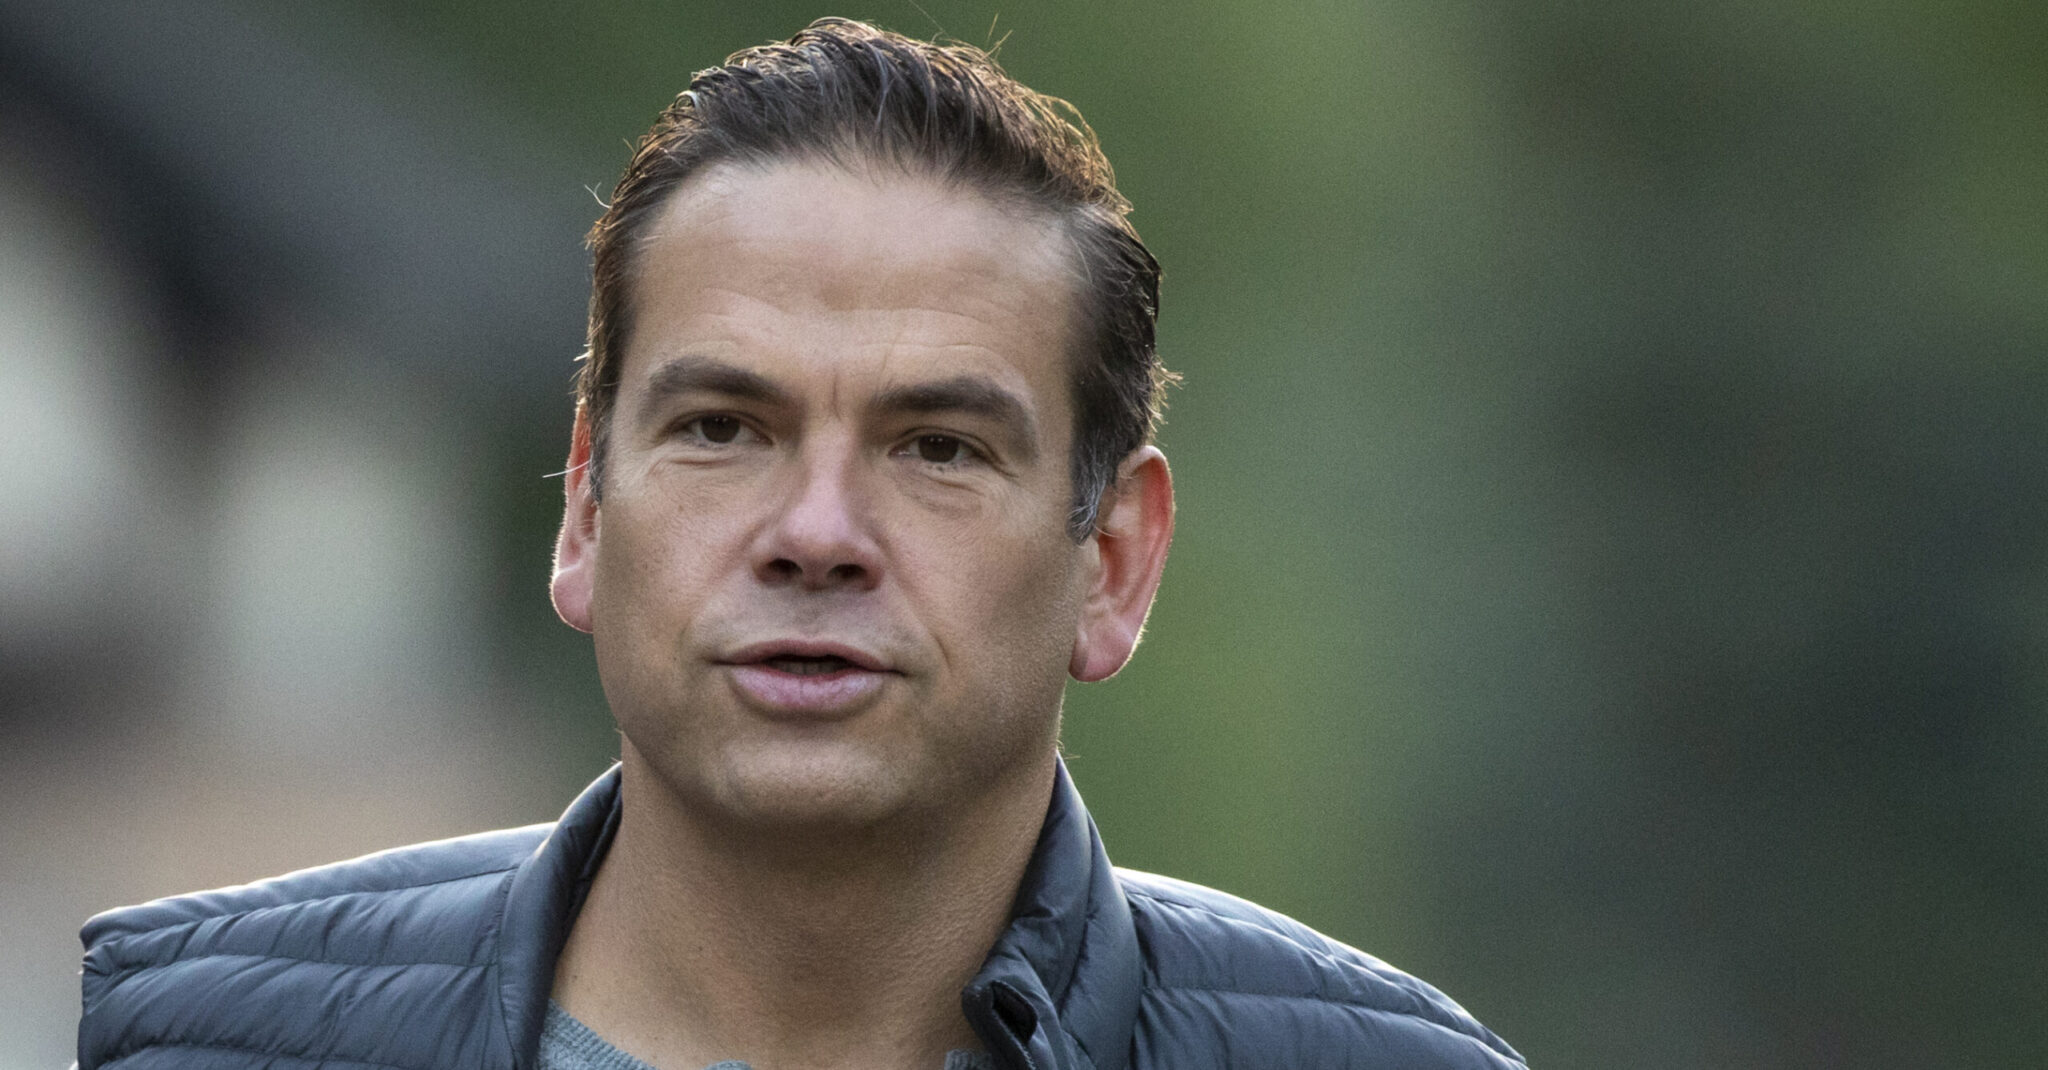 Australian News Outlet Dares Lachlan Murdoch to Sue Them For Tying Fox News to January 6: ‘We Await Your Writ’ (mediaite.com)